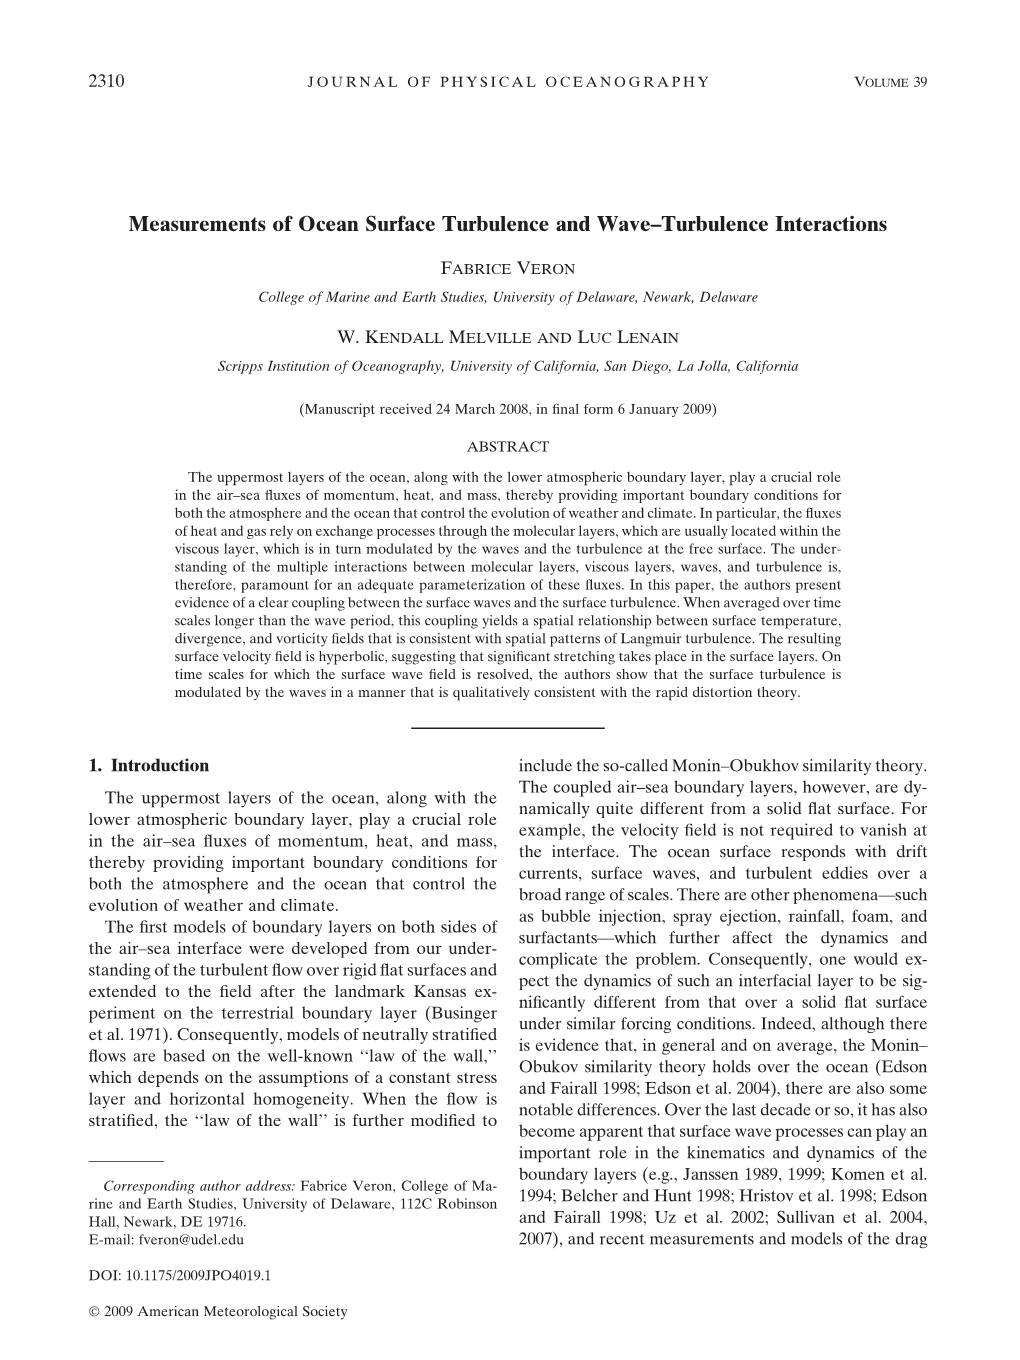 Measurements of Ocean Surface Waves and Surface Turbulence